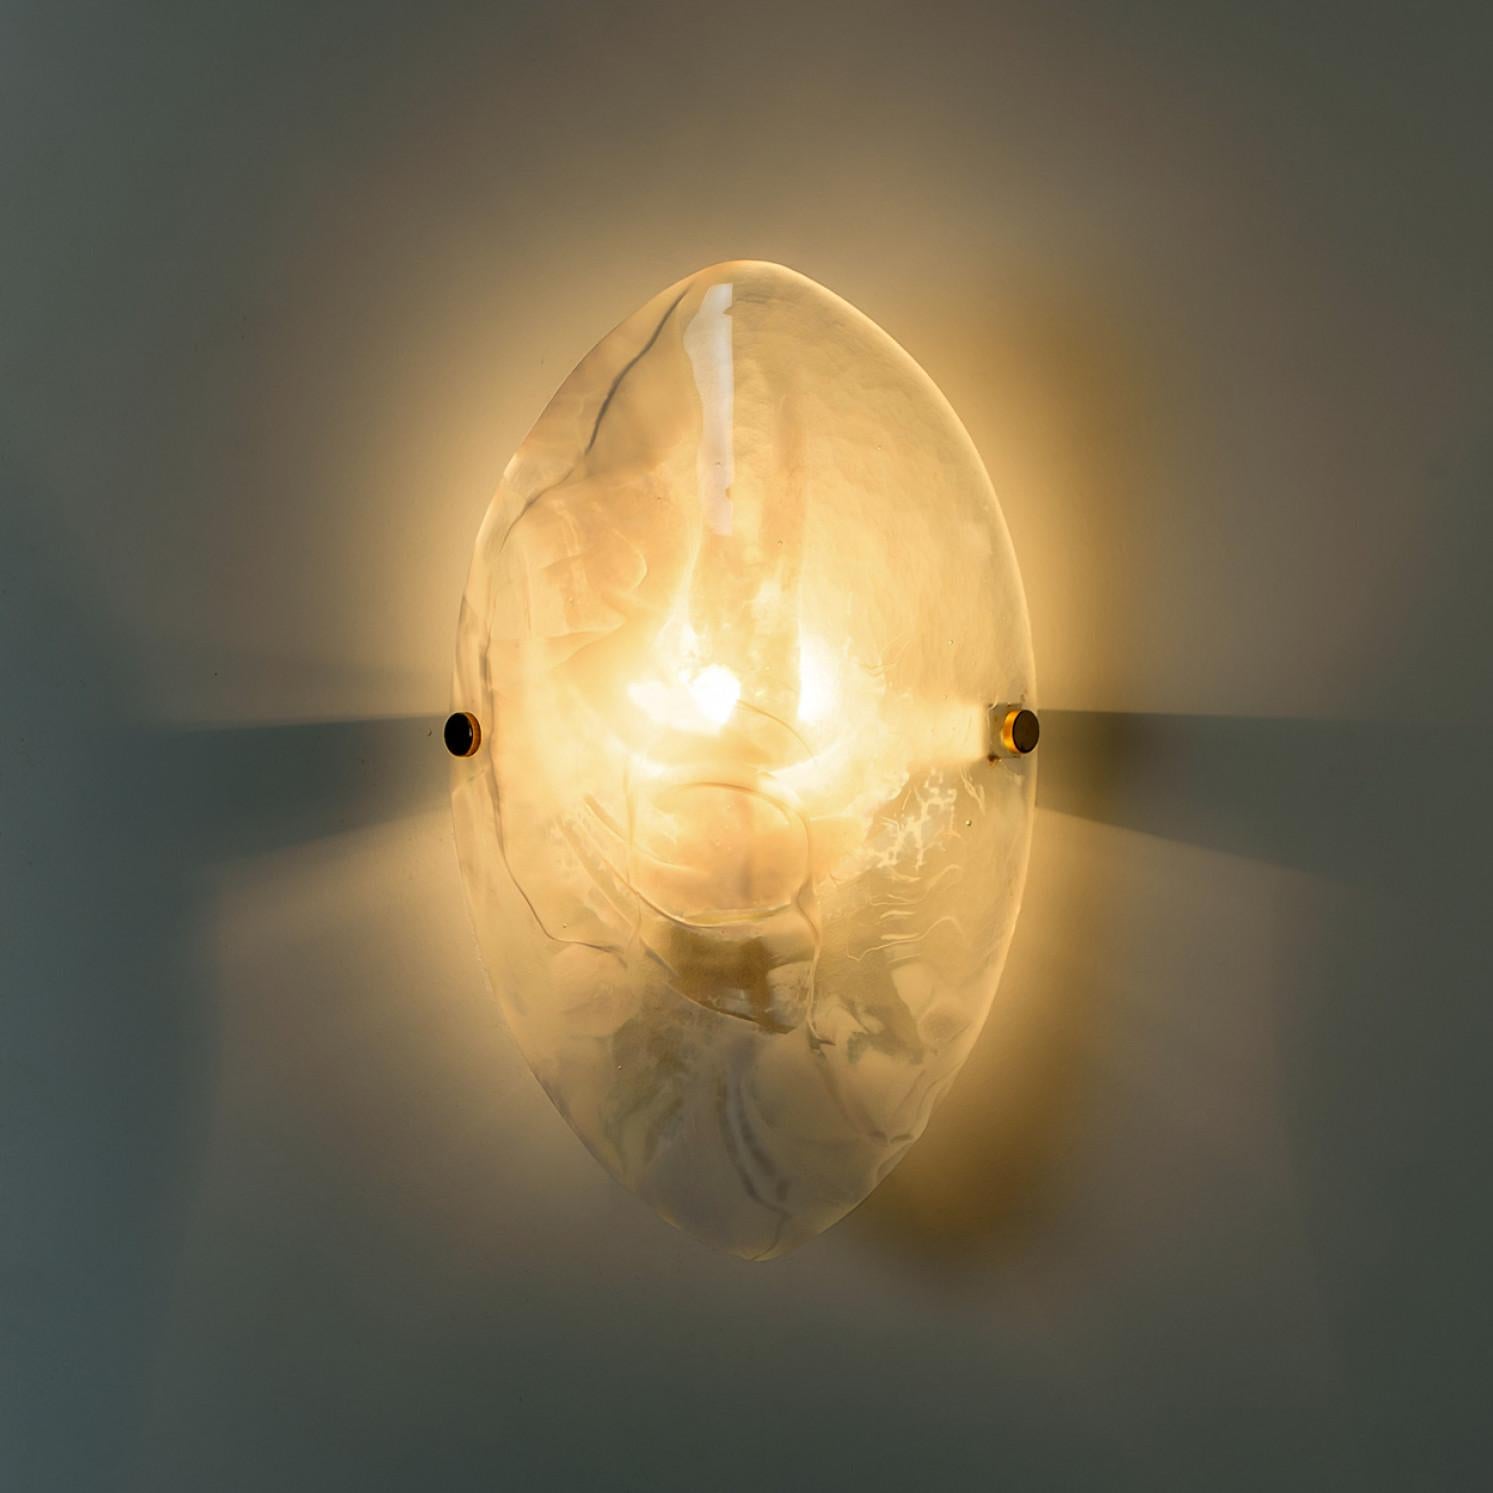 Oval Marbled Glass Wall Light by Hillebrand, Germany, 1960s For Sale 1